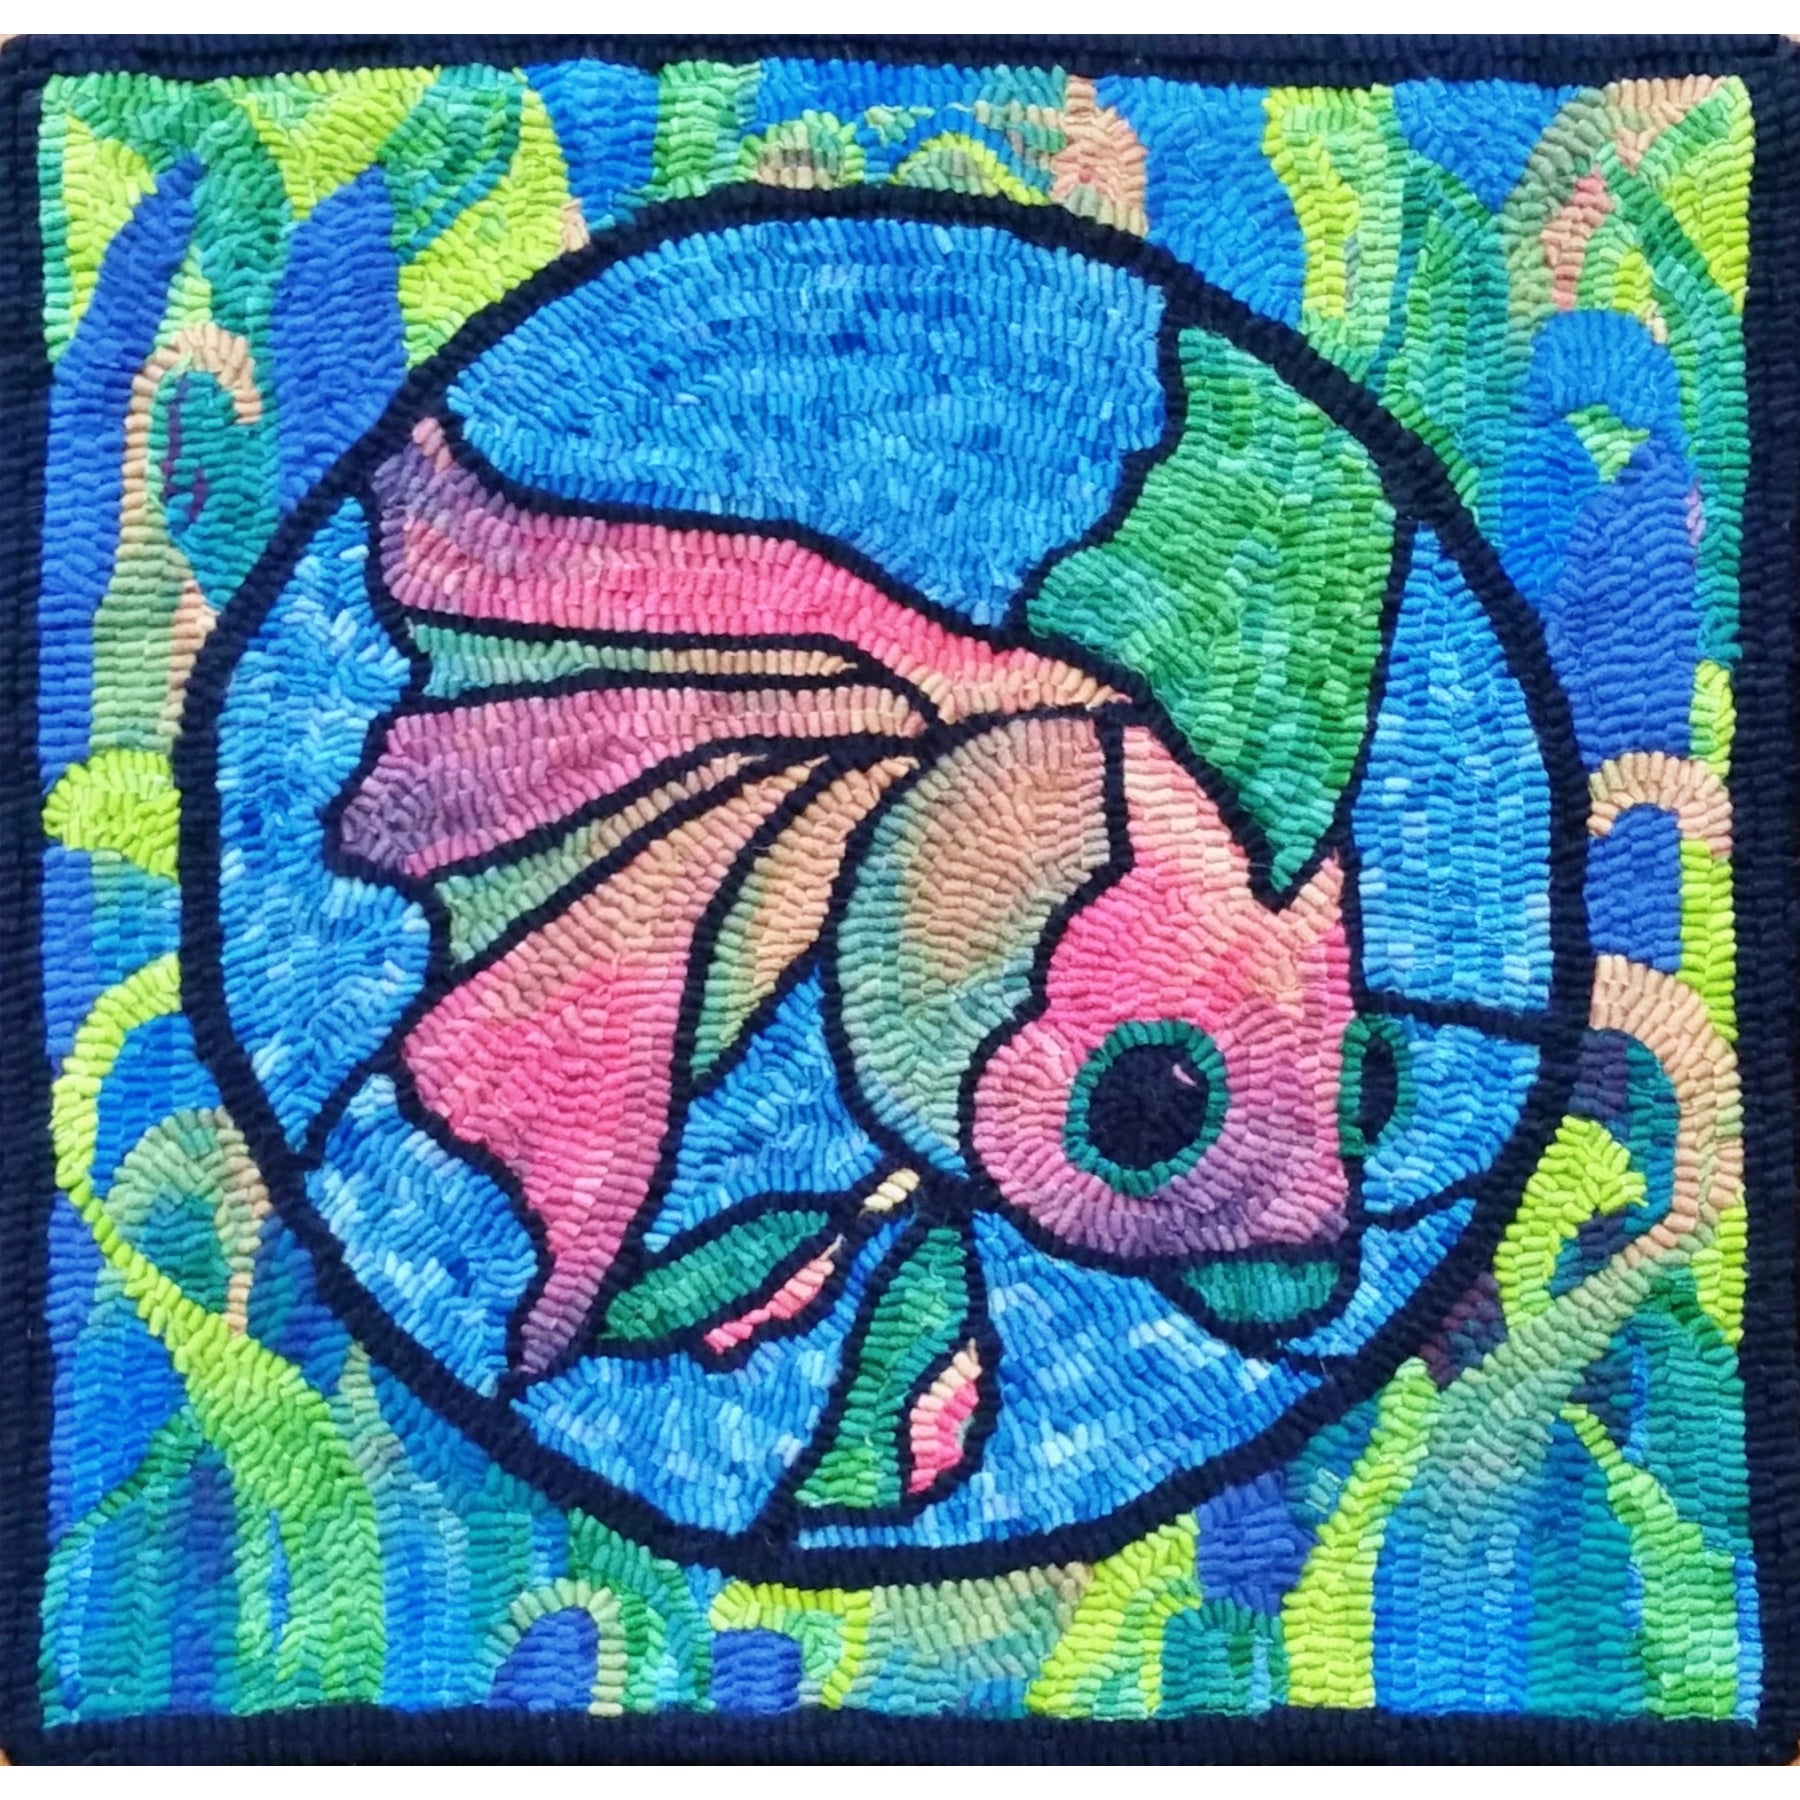 Stained Glass Fish, rug hooked by Nancy Gingrich